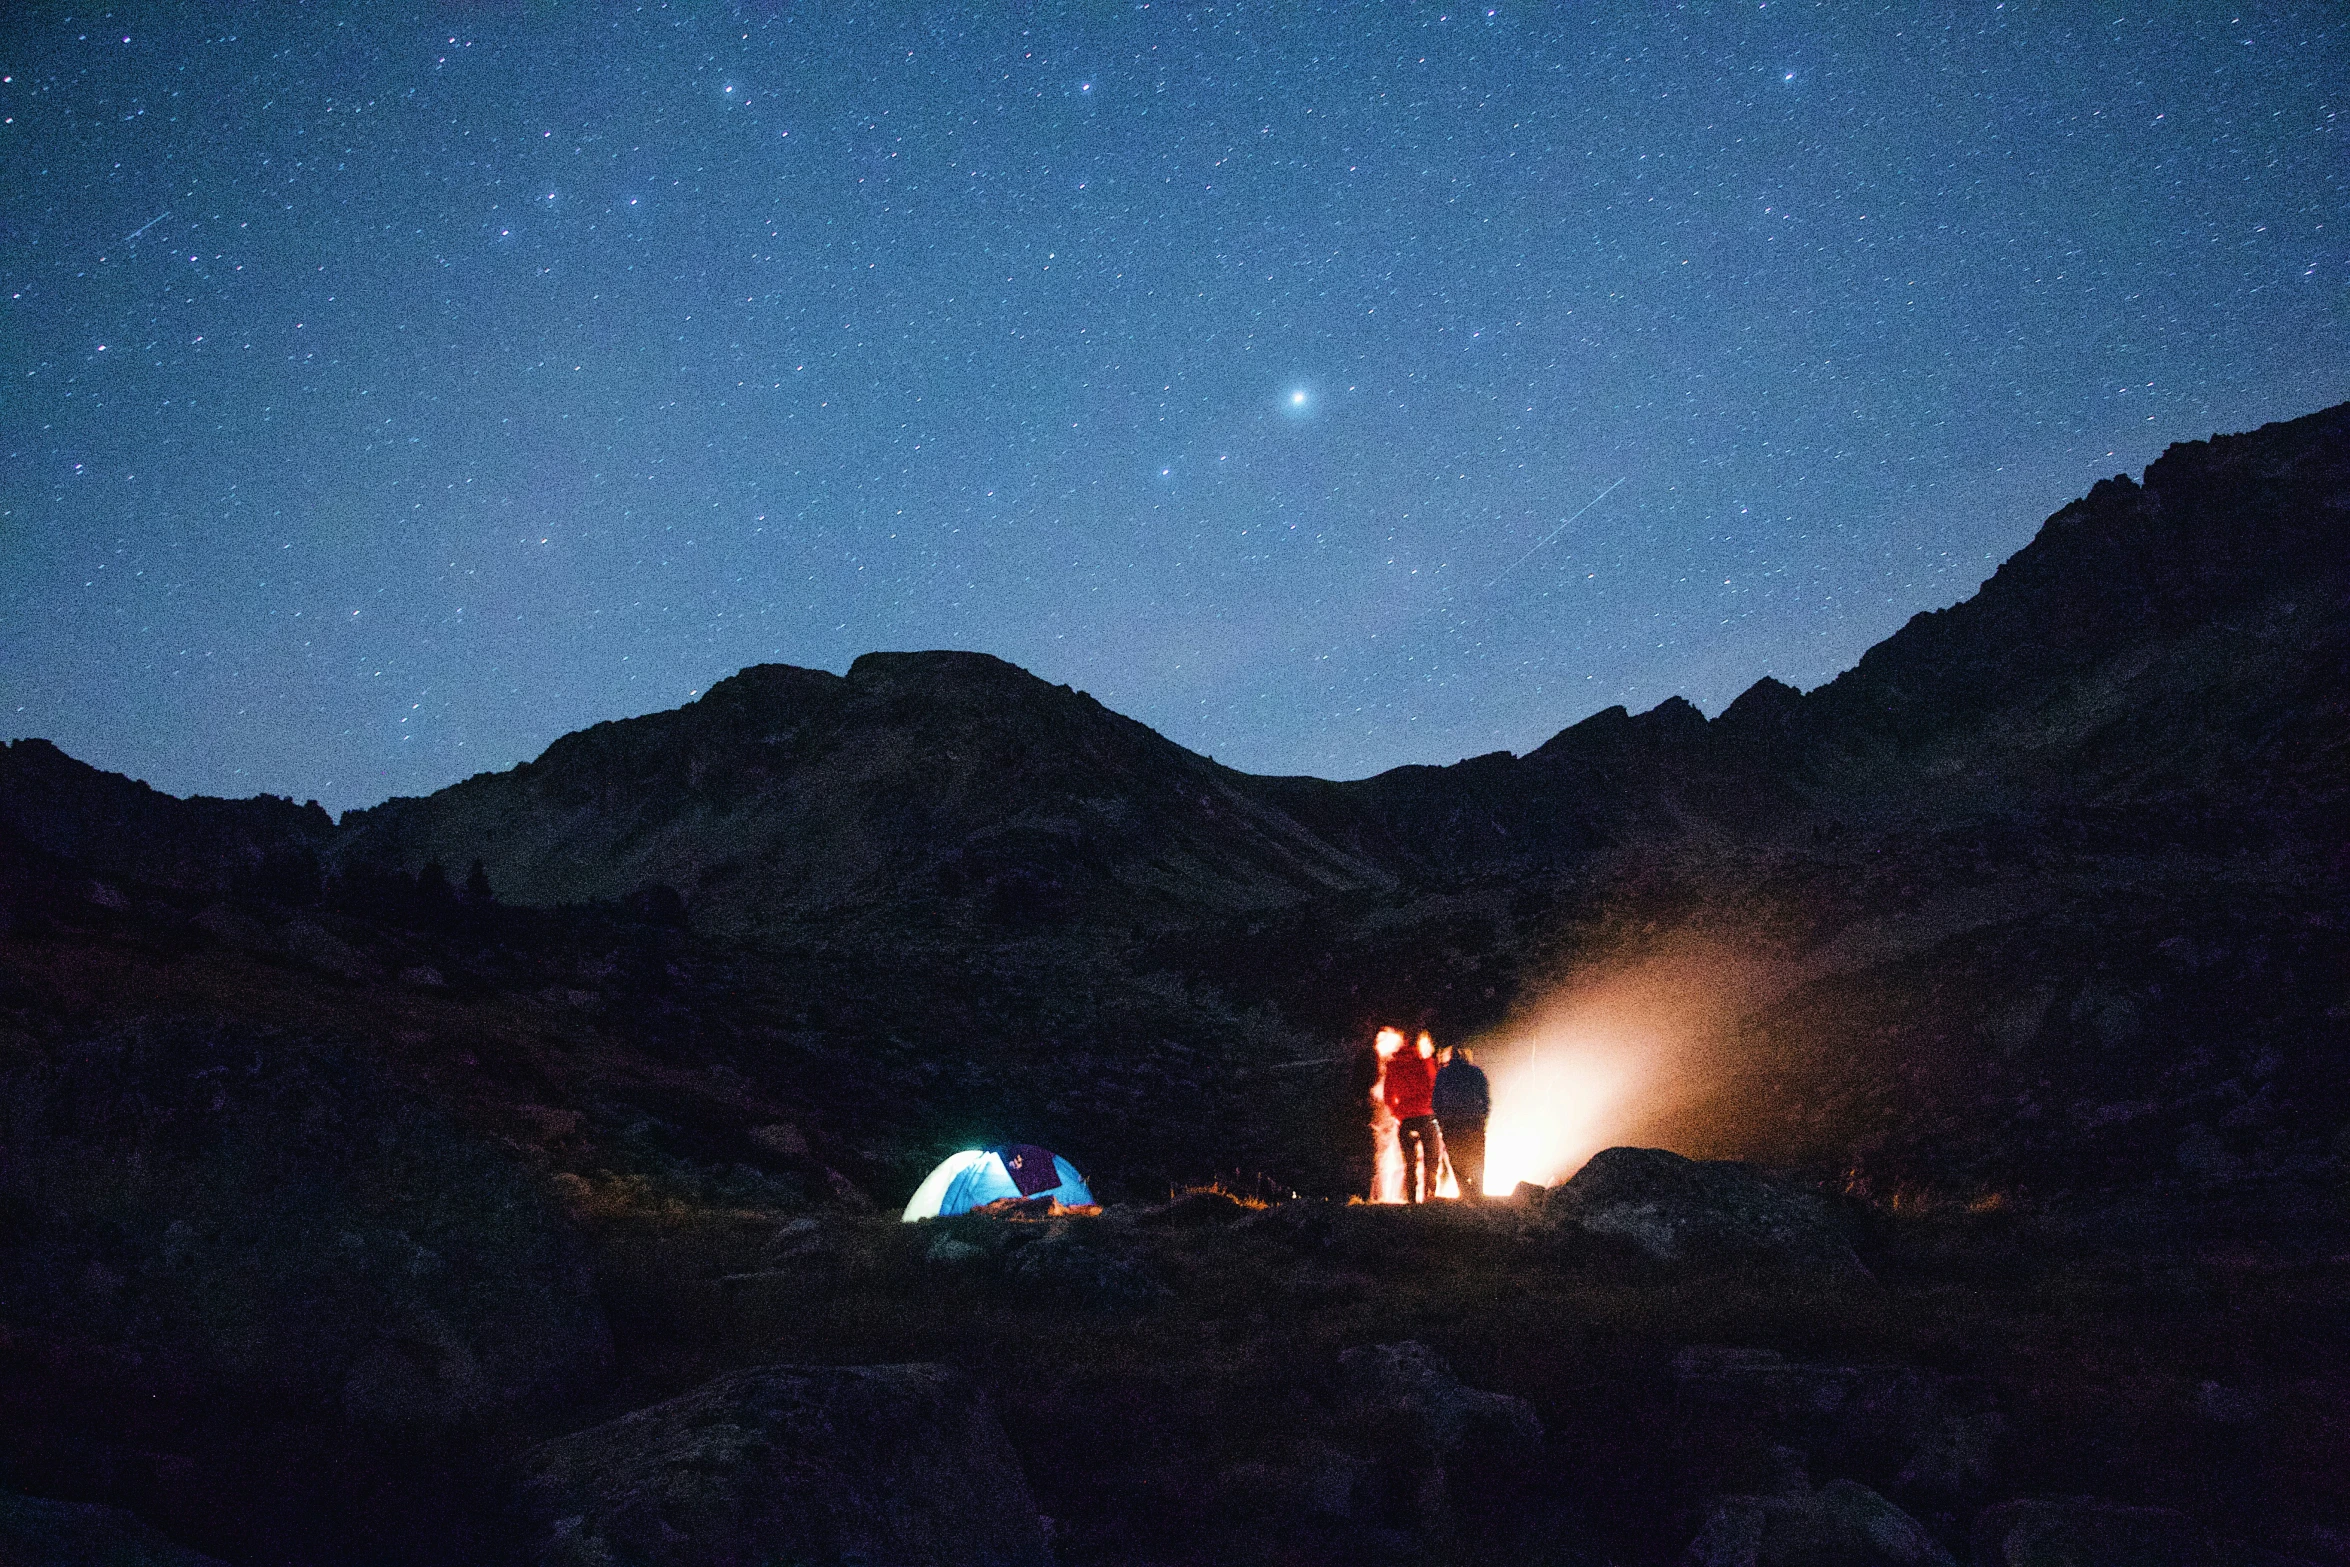 two people standing near camping equipment at night